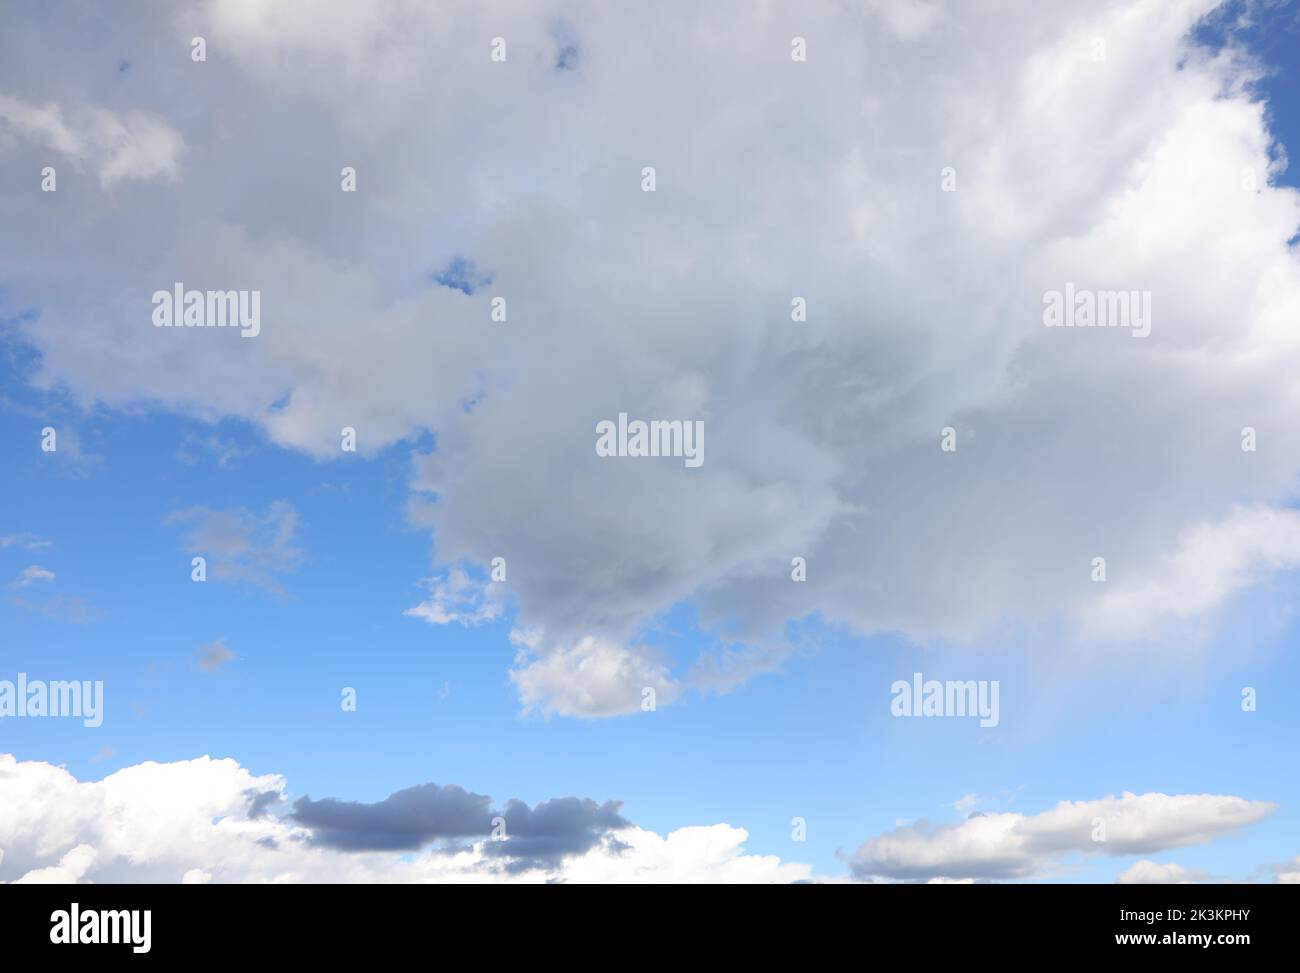 clear blue sky with white clouds and some black clouds without planes Stock Photo